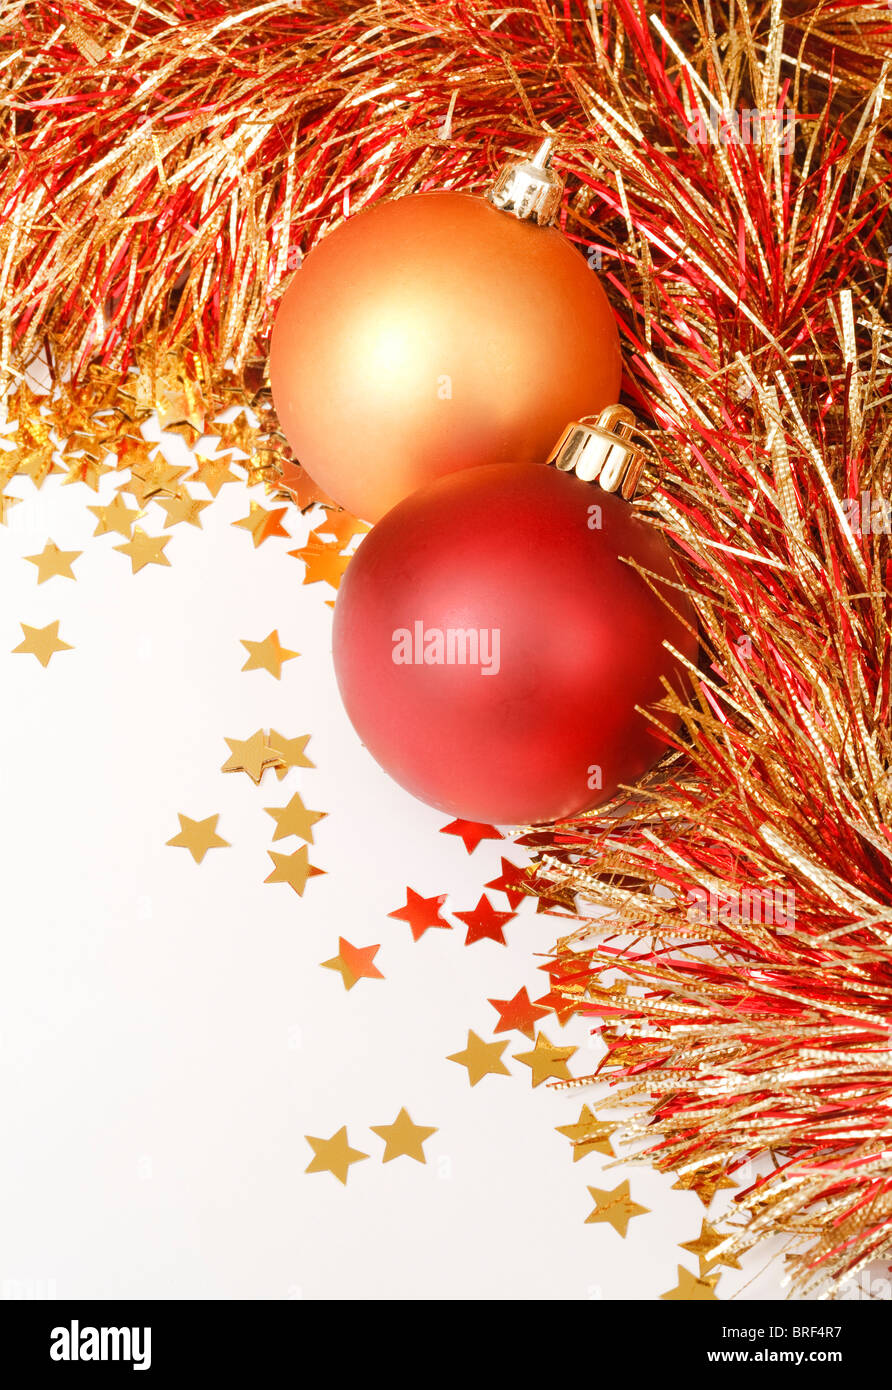 Festive Christmas design with baubles, tinsel and confetti Stock Photo